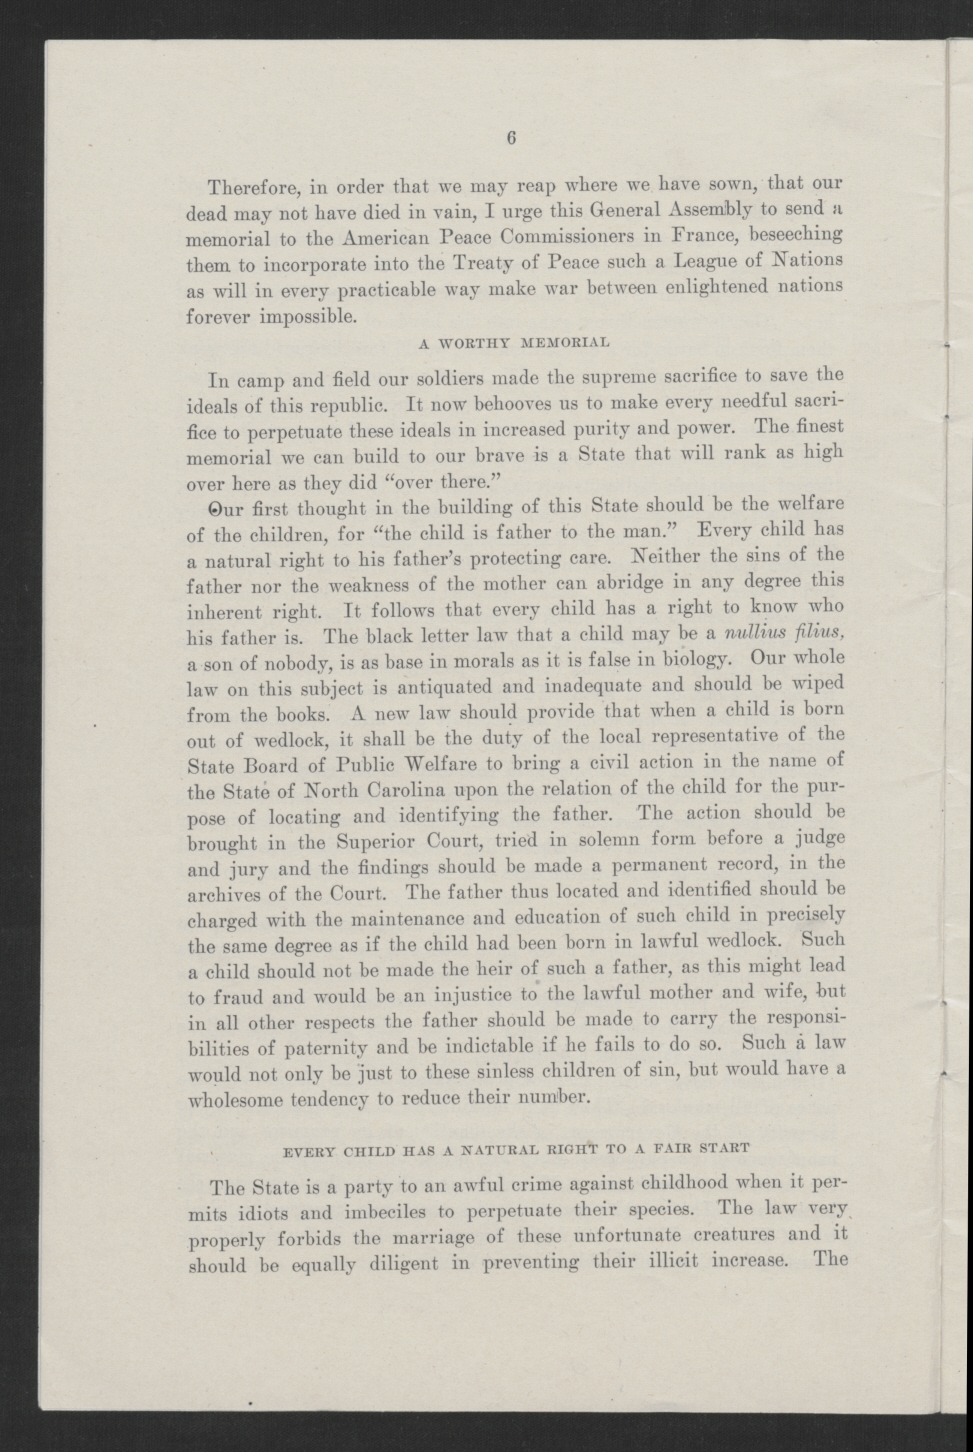 Biennial Message of Governor Thomas W. Bickett to the General Assembly, January 9, 1919, page 4